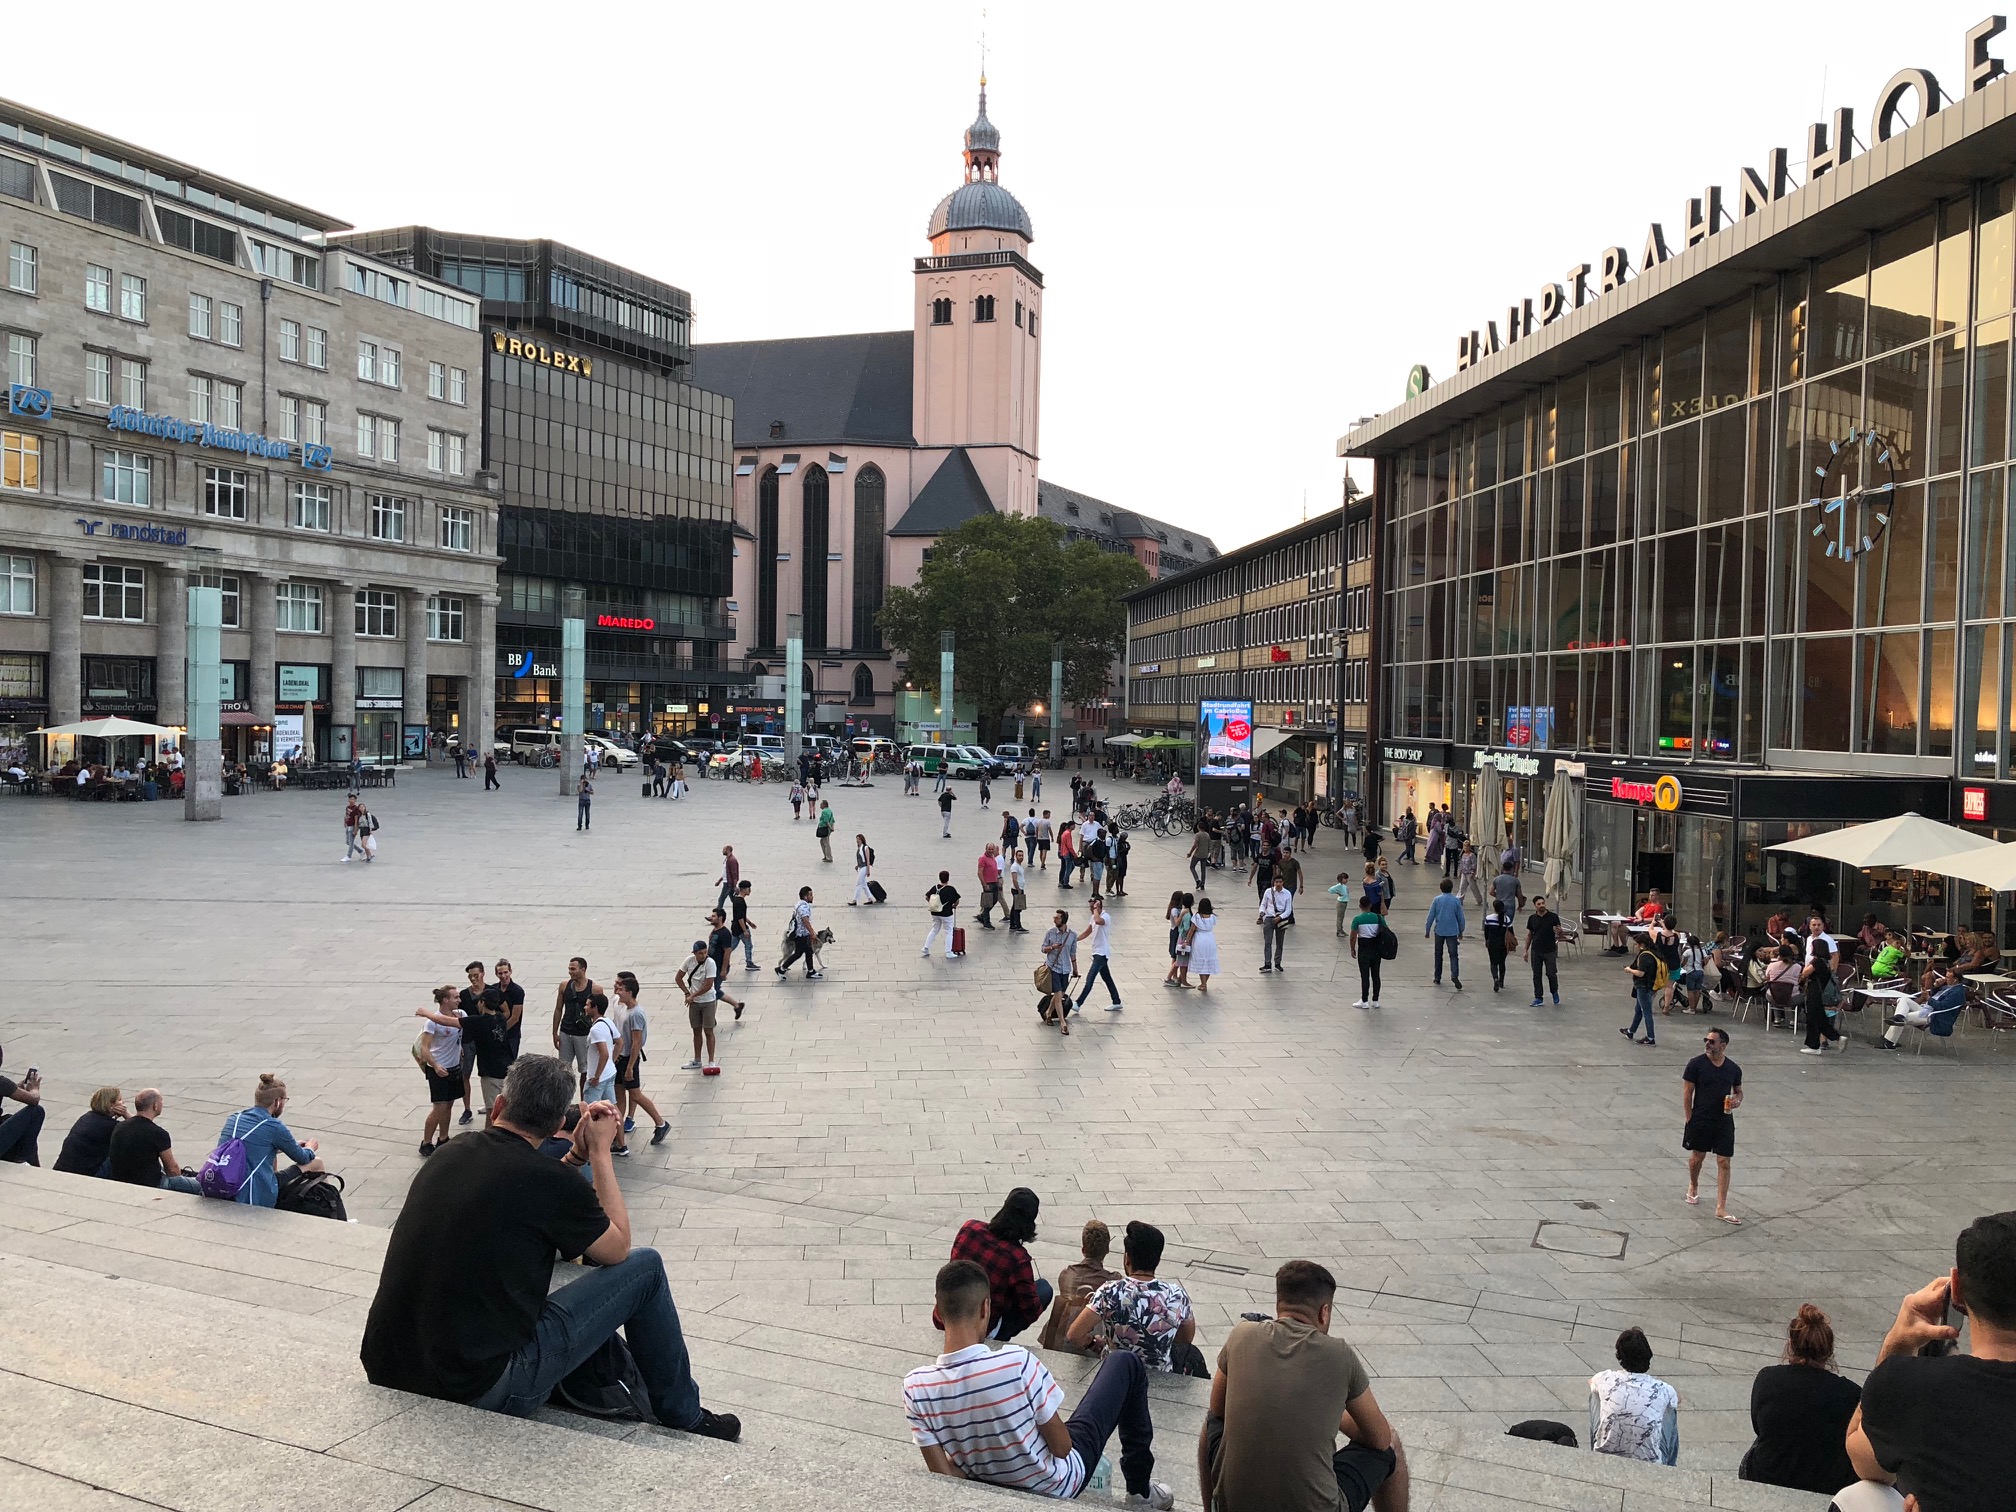 The view of the square outside Hauptbahnhof from where I'm sitting